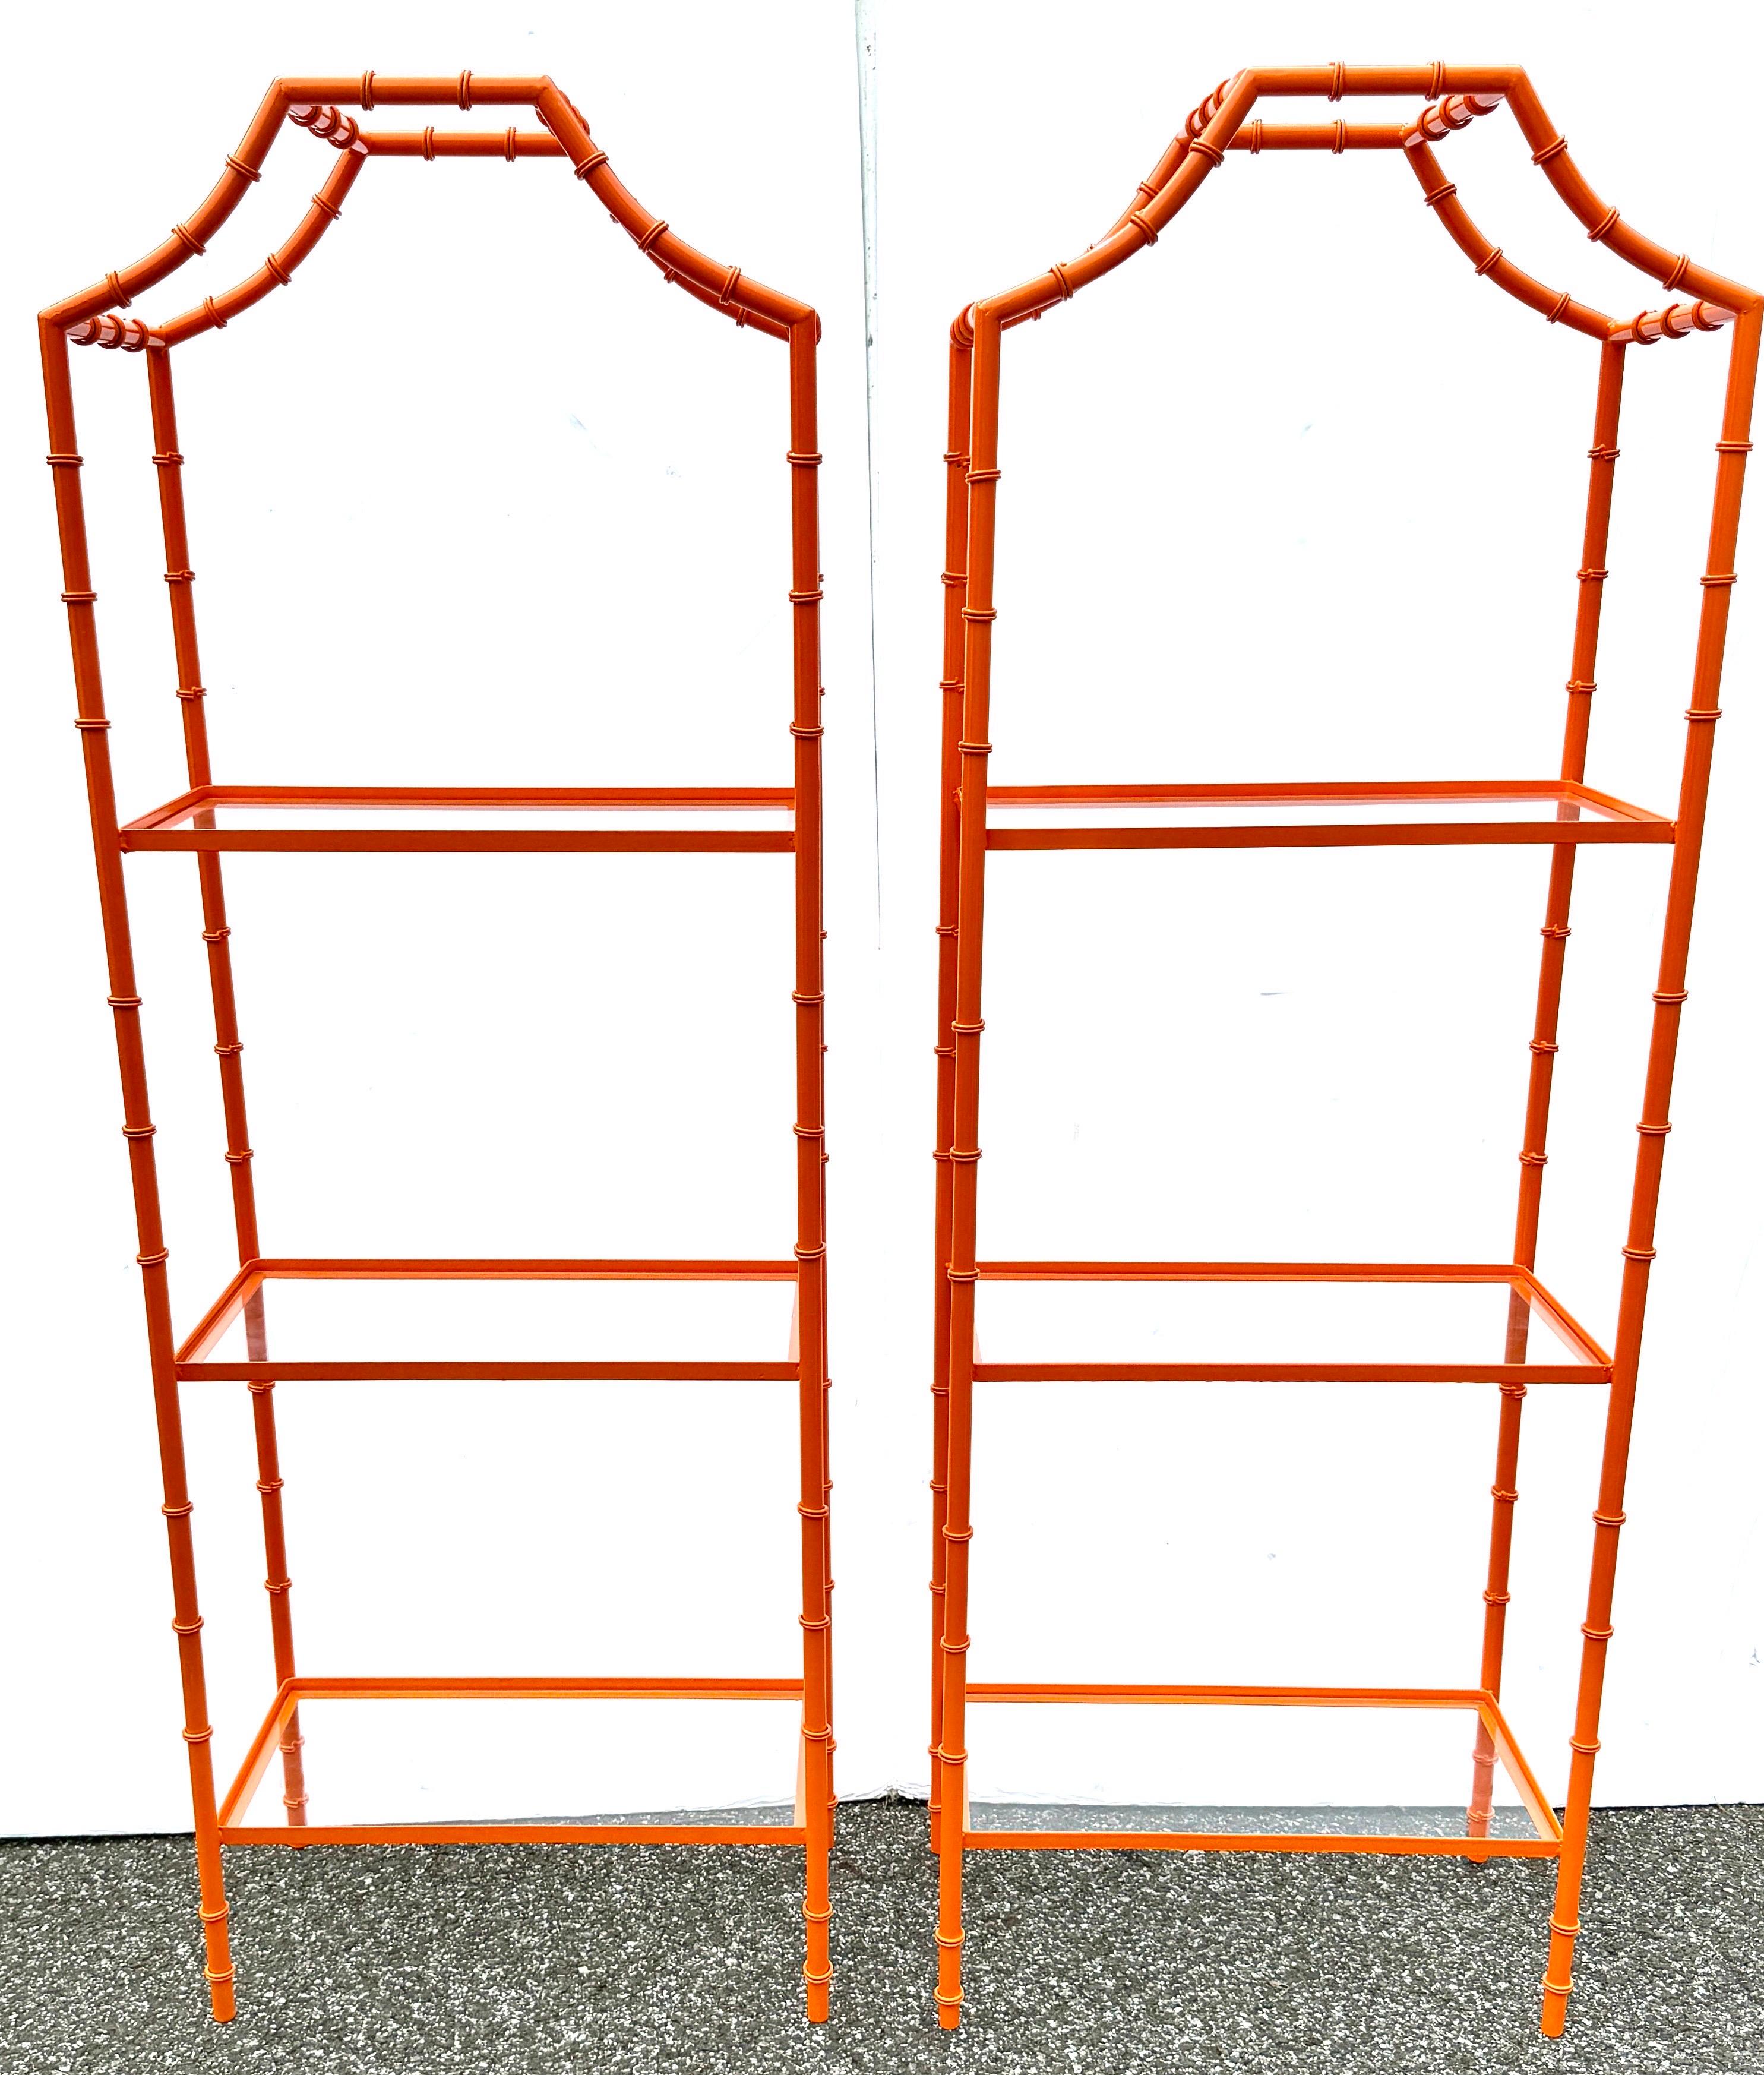 Mid-Century Modern Orange Faux Bamboo Etagere Shelves, A Pair

Two metal faux bamboo etageres in a powder-coated color we like to call Hermes Orange finish. These mid-century etageres feature three glass shelves perfect for displaying your favorite